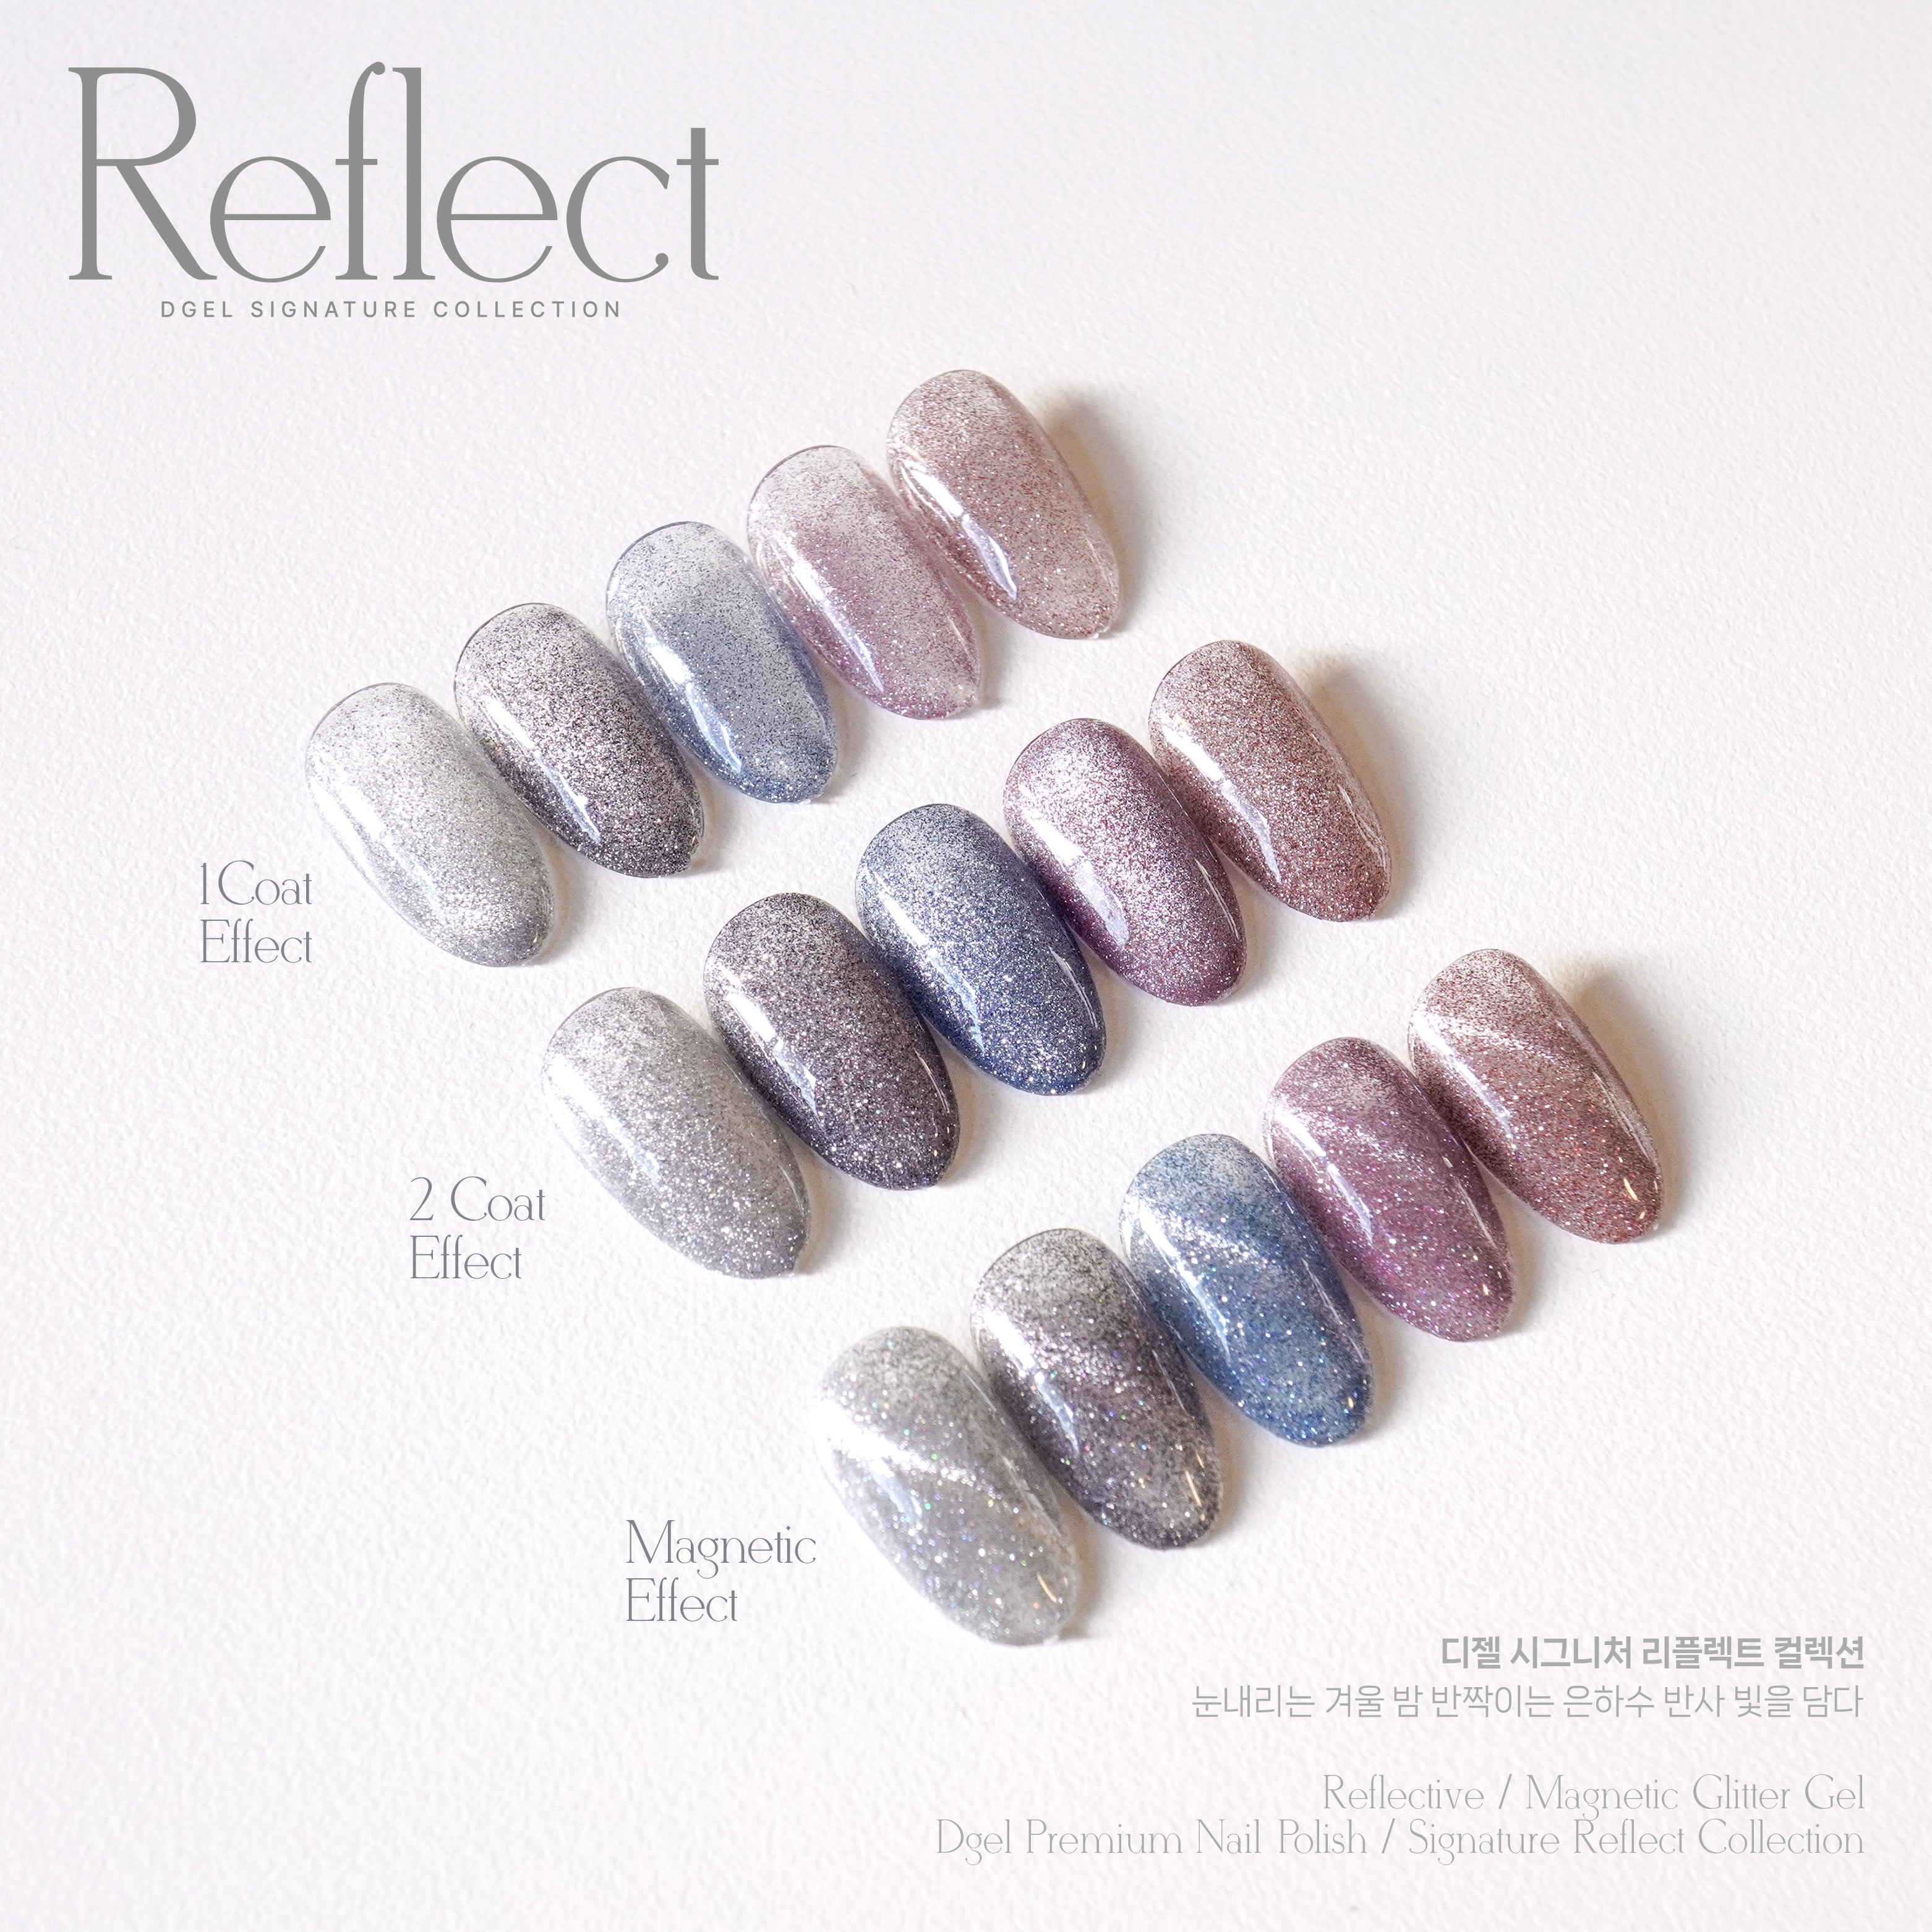 DGEL Signature Reflect individual/collection - Reflective magnetic gel | HEMA FREE